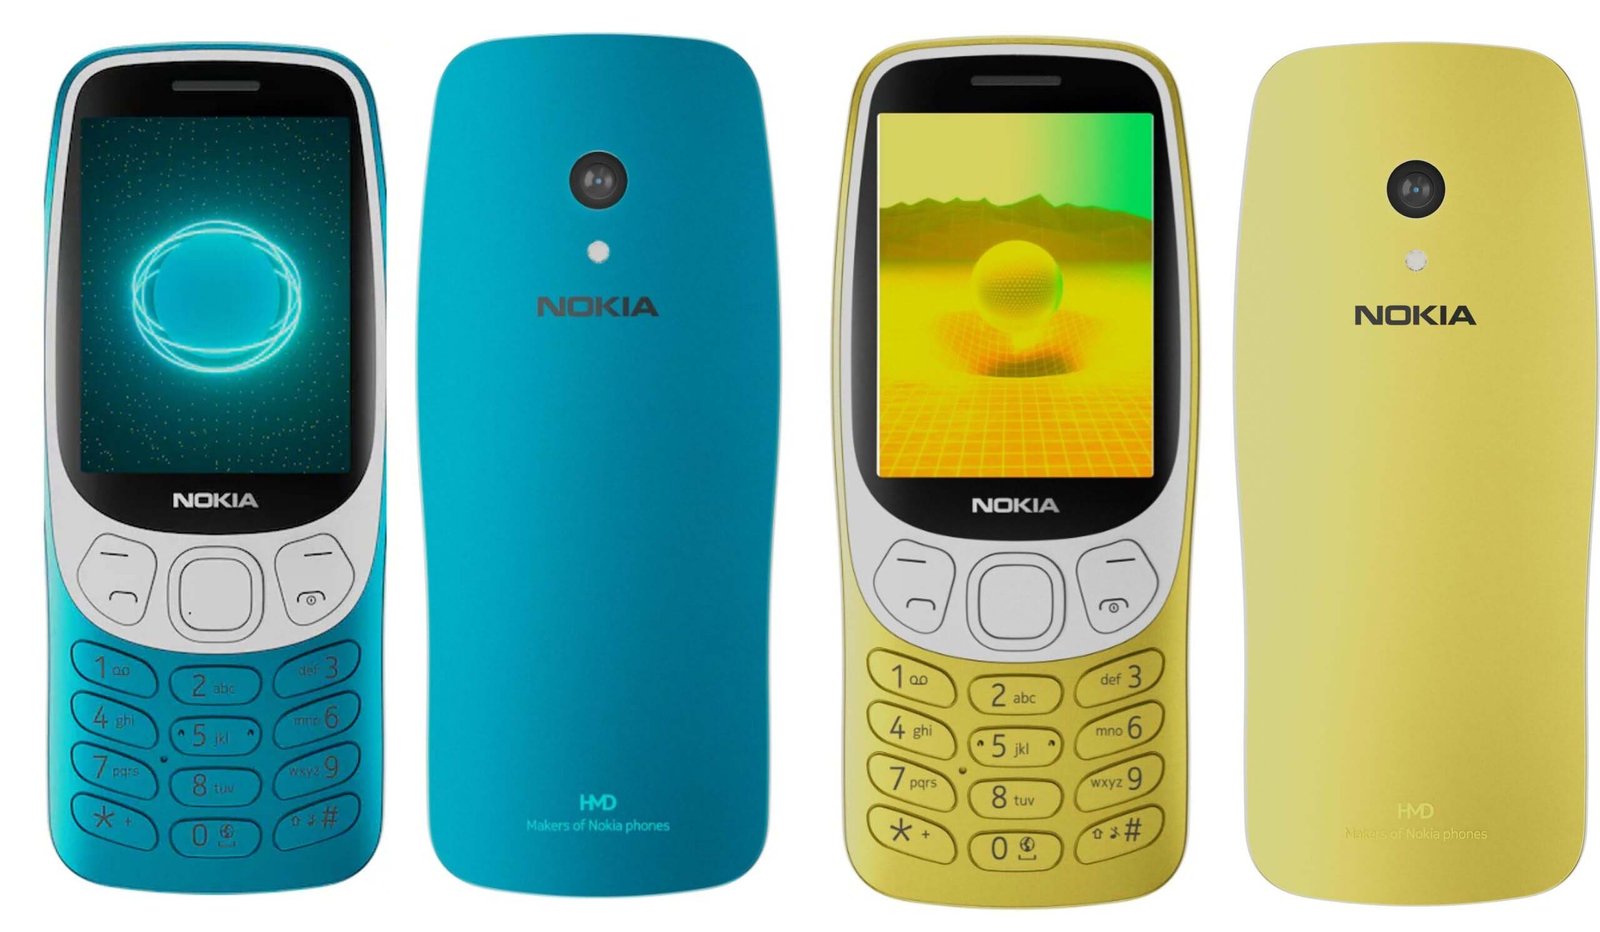 Nokia 3210 | Nokia 3210 is back, your favorite phone now in a modern avatar